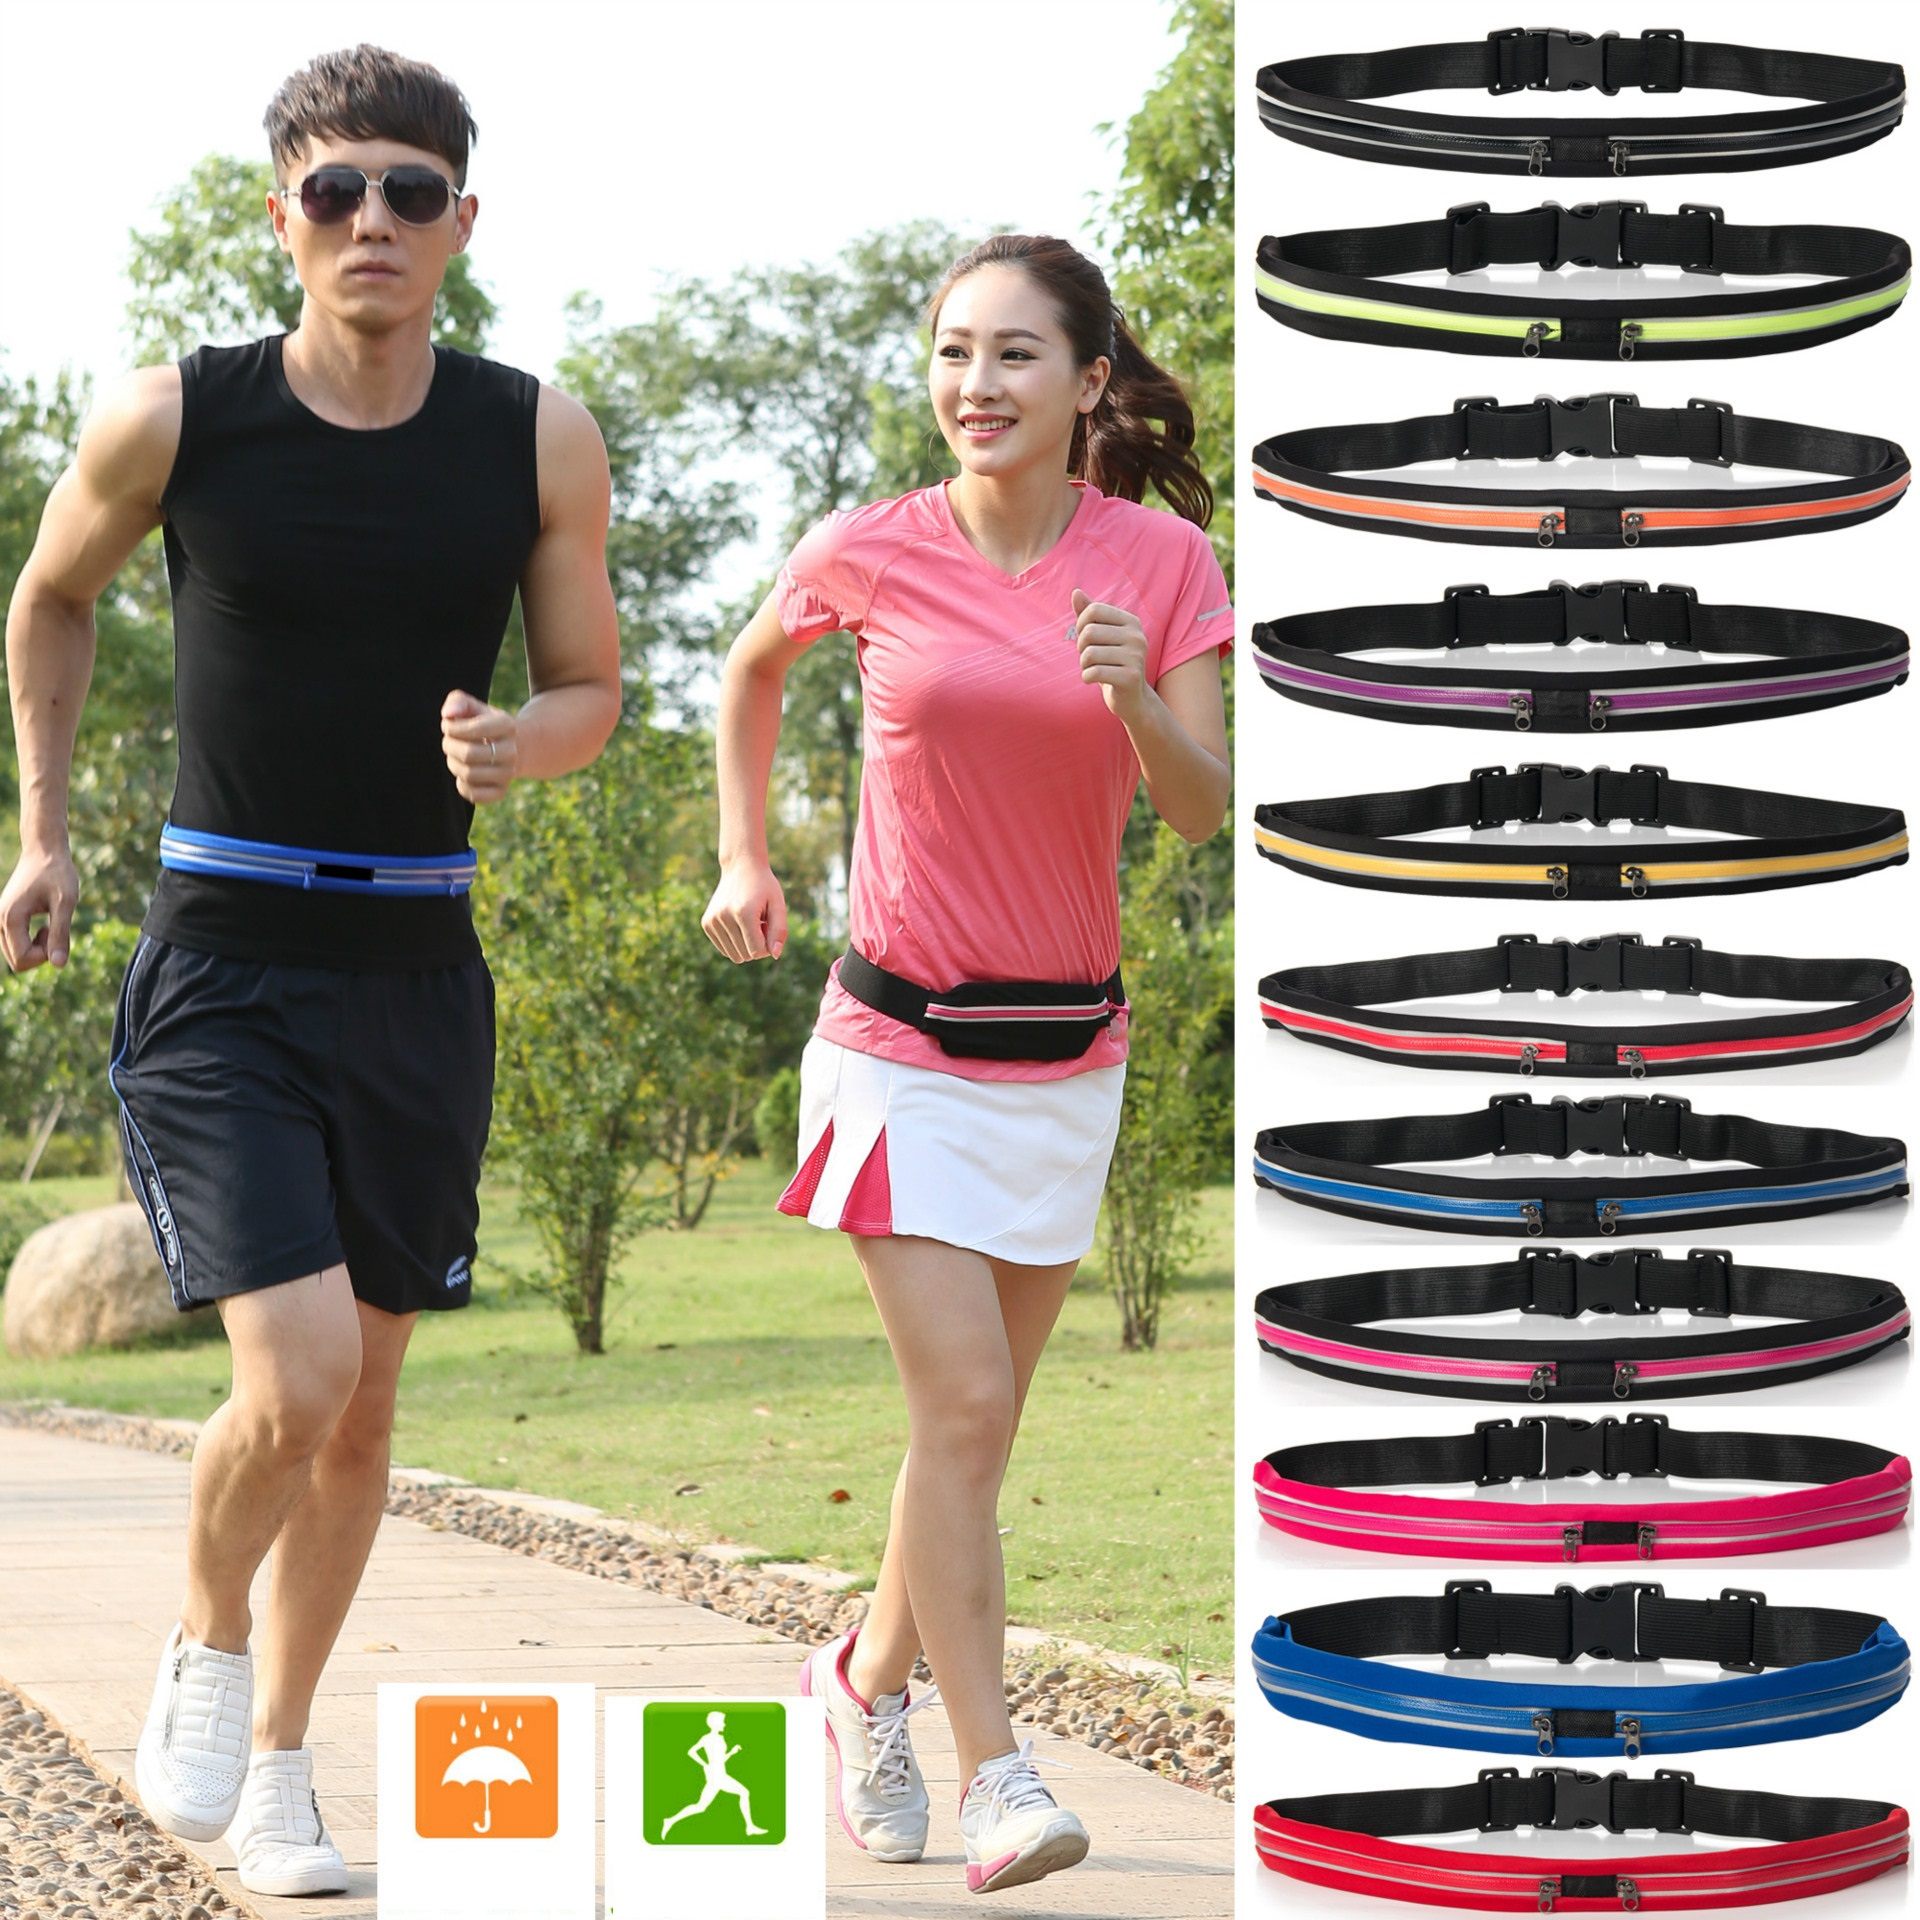 Outdoor Sports Pockets, Fitness, Running, Riding Belts, Sweat-proof Mobile Phone Invisible Large-capacity Pockets